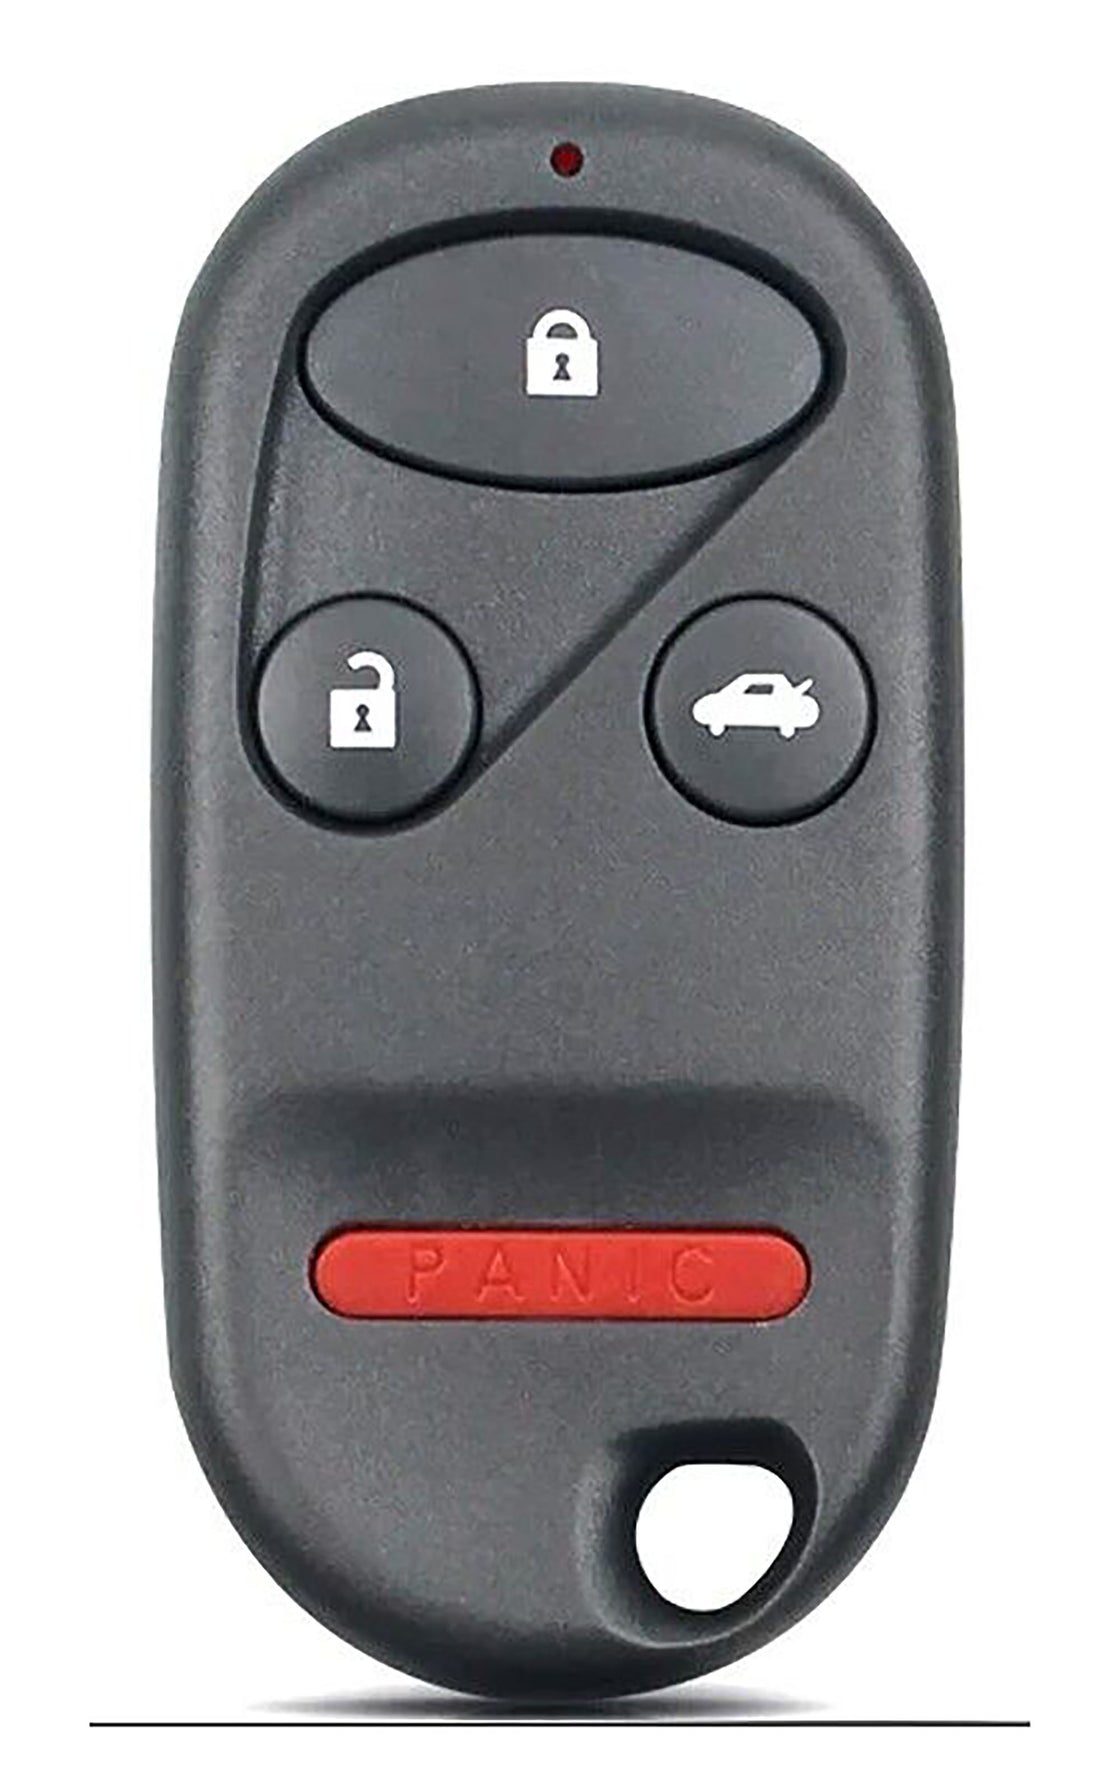 1x New Replacement Key Fob Remote Compatible with & Fit For Acura Vehicles (Check Fitment) - MPN A269ZUA108-02